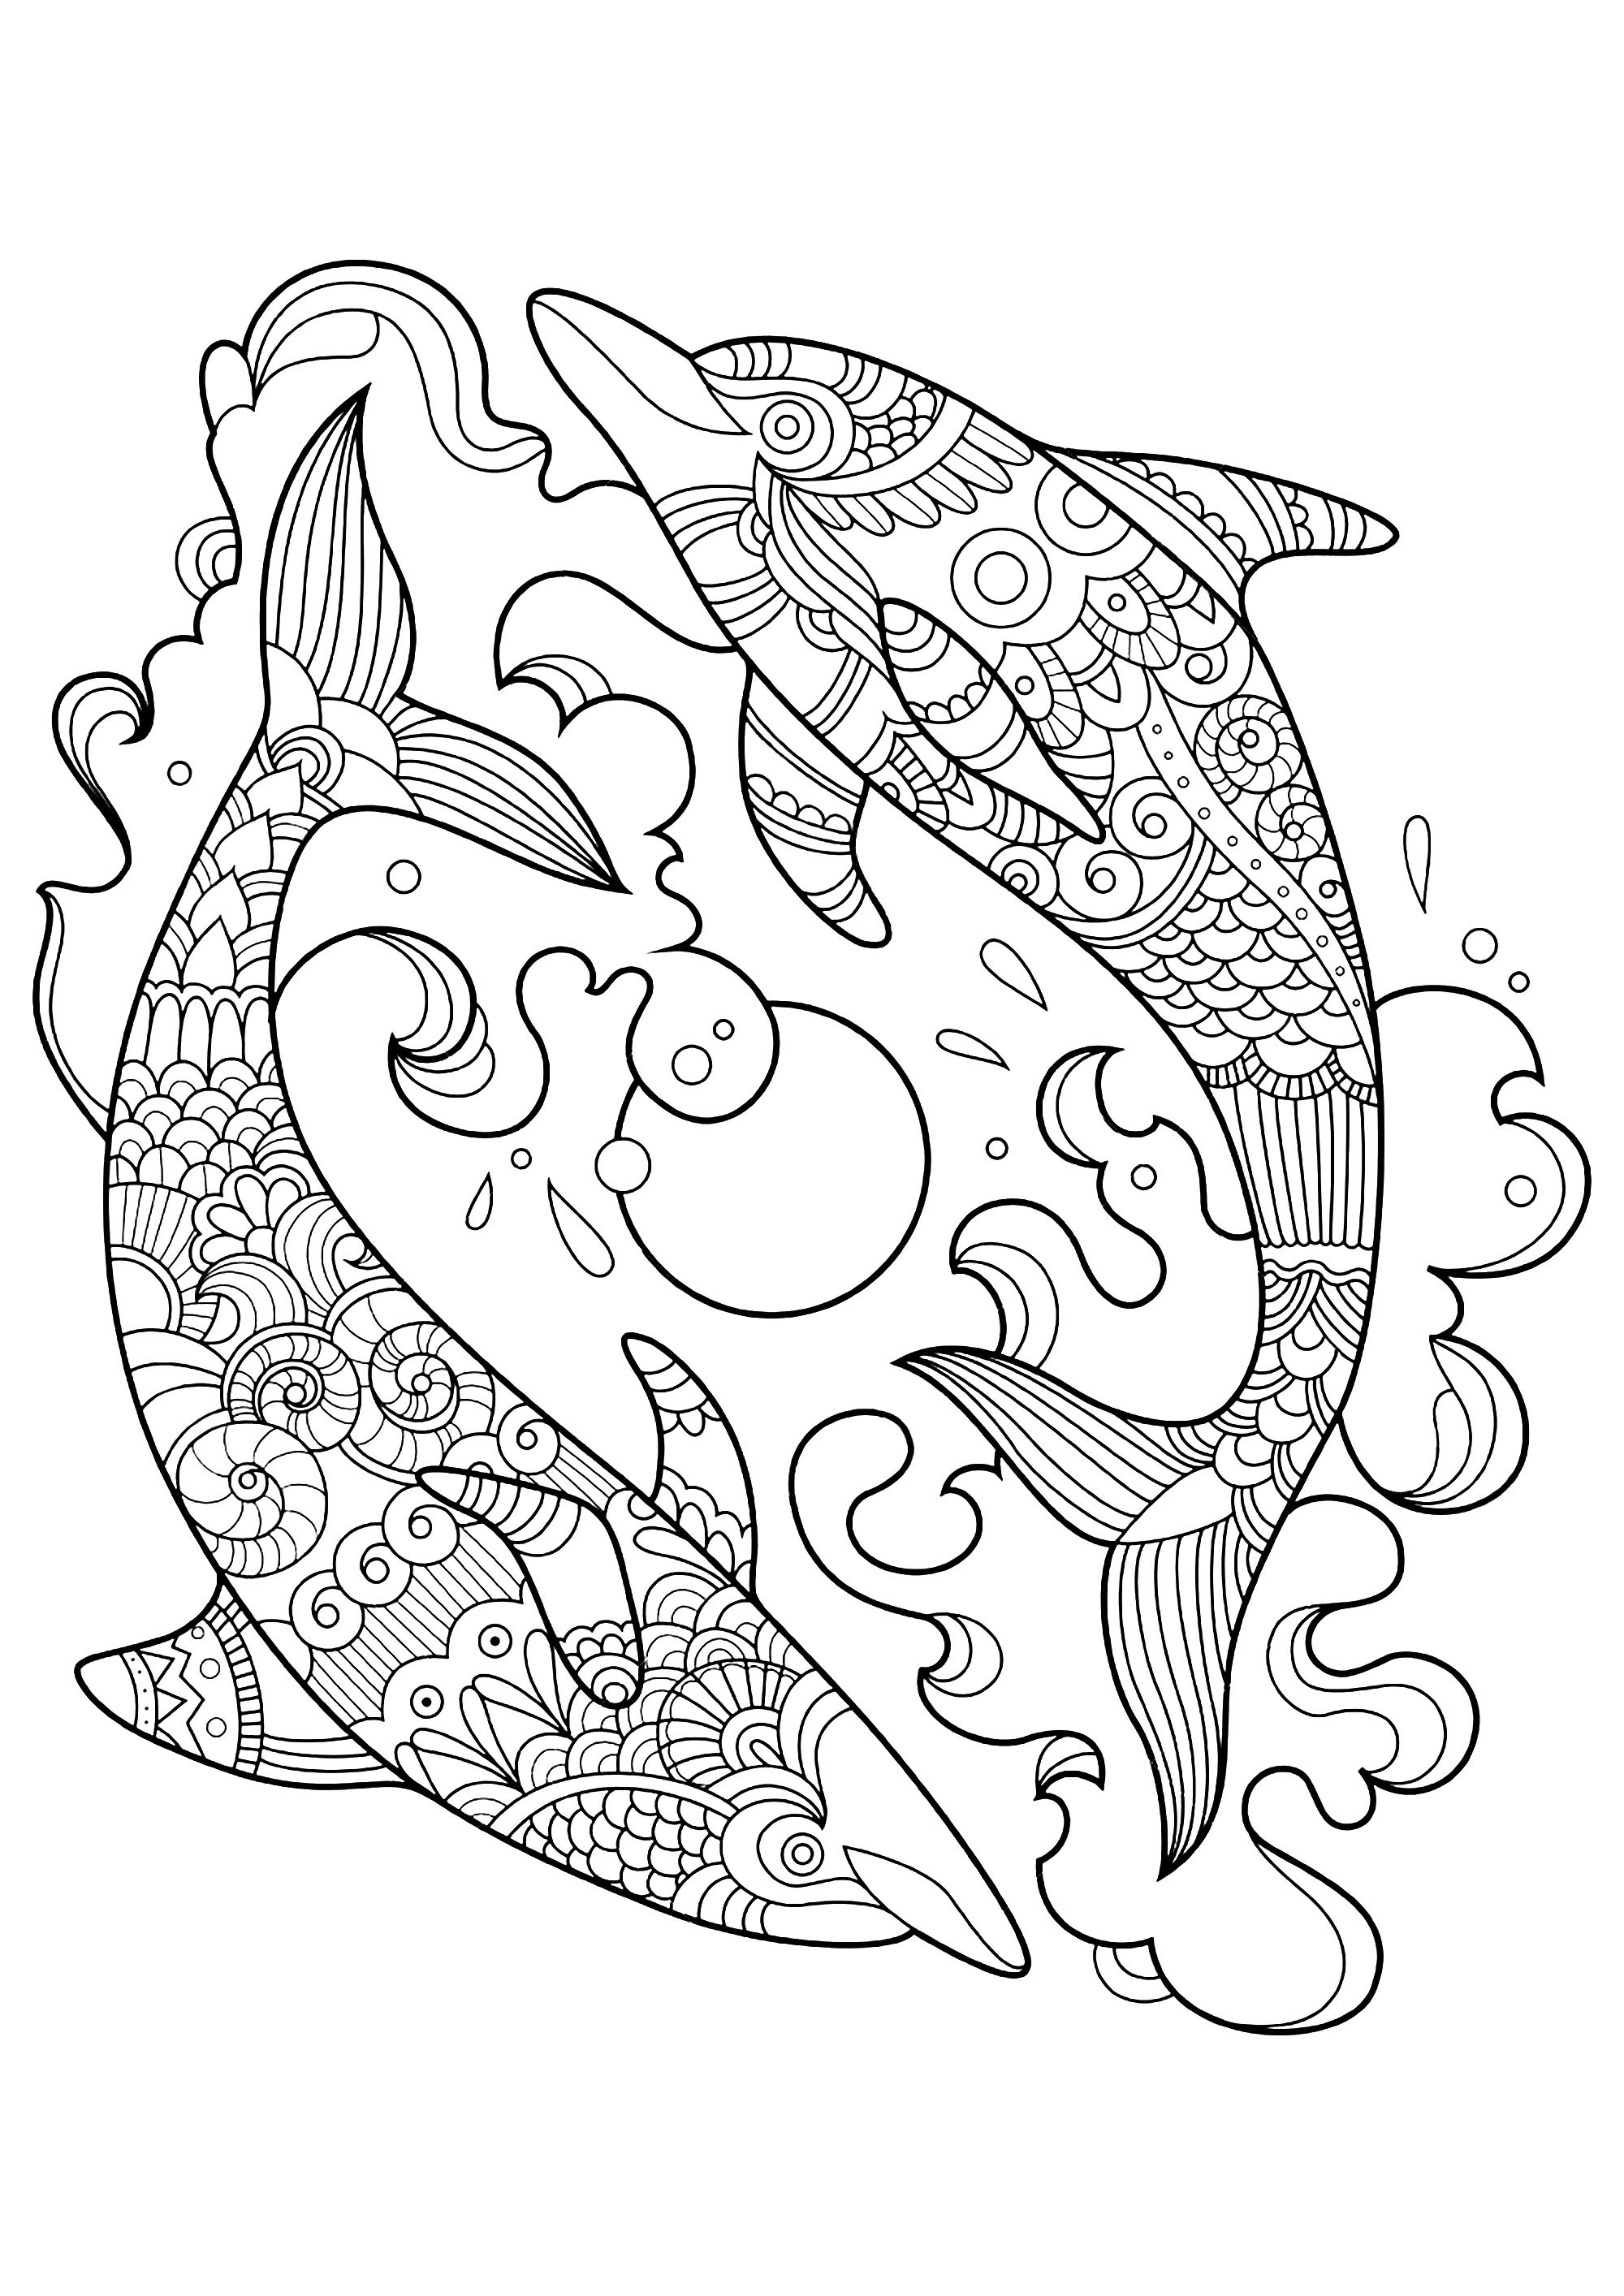 Printable Coloring Pages Of Ocean Delfin For Kids 7